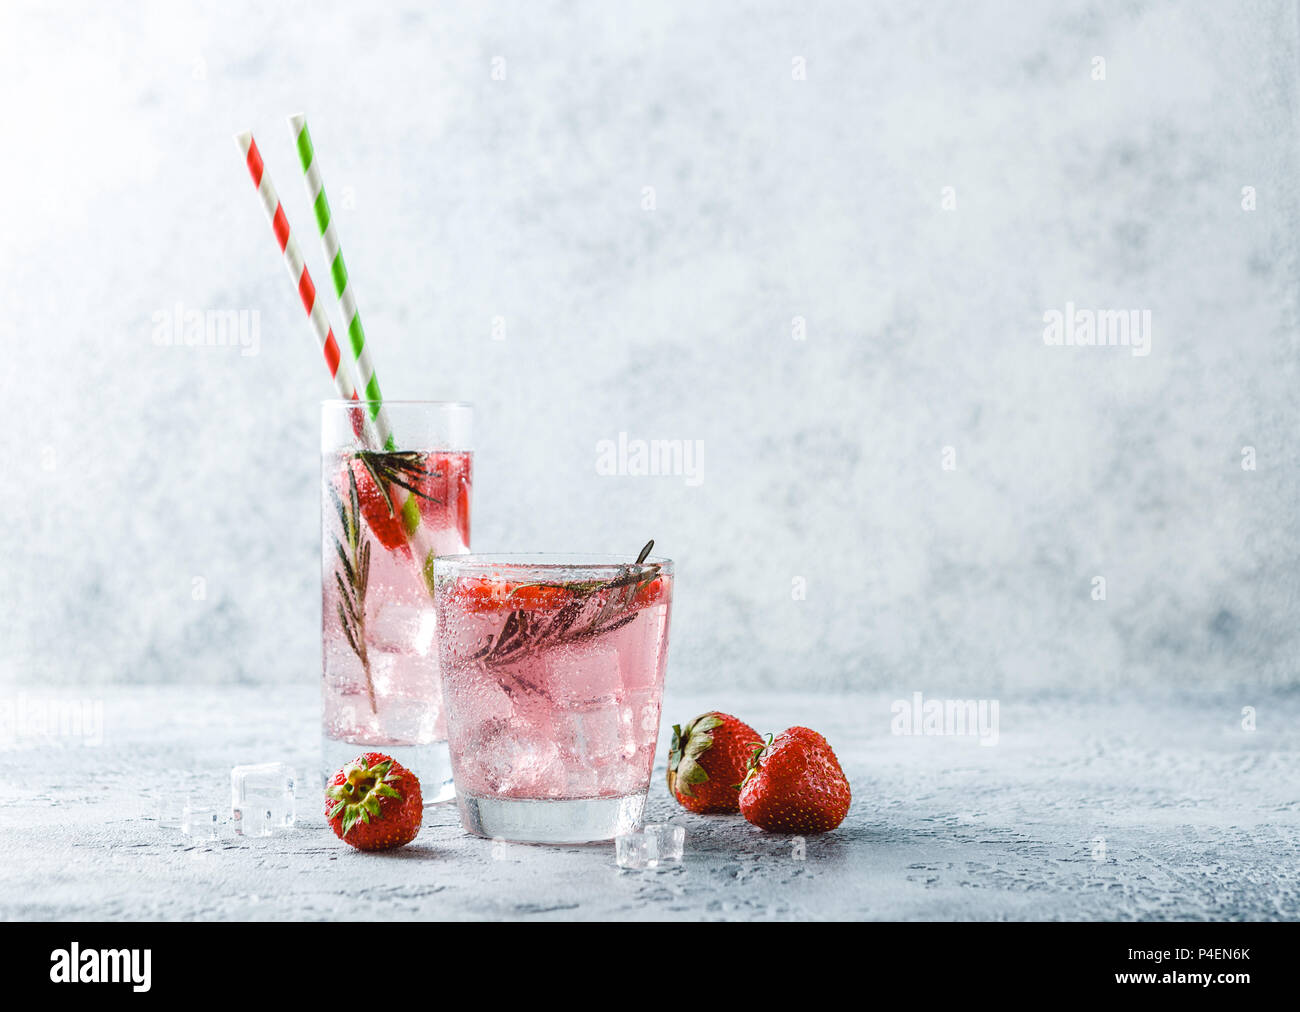 Alcoholic or non-alcoholic cocktail with strawberries and rosemary and ice in glass glasses. Free space for text. Stock Photo